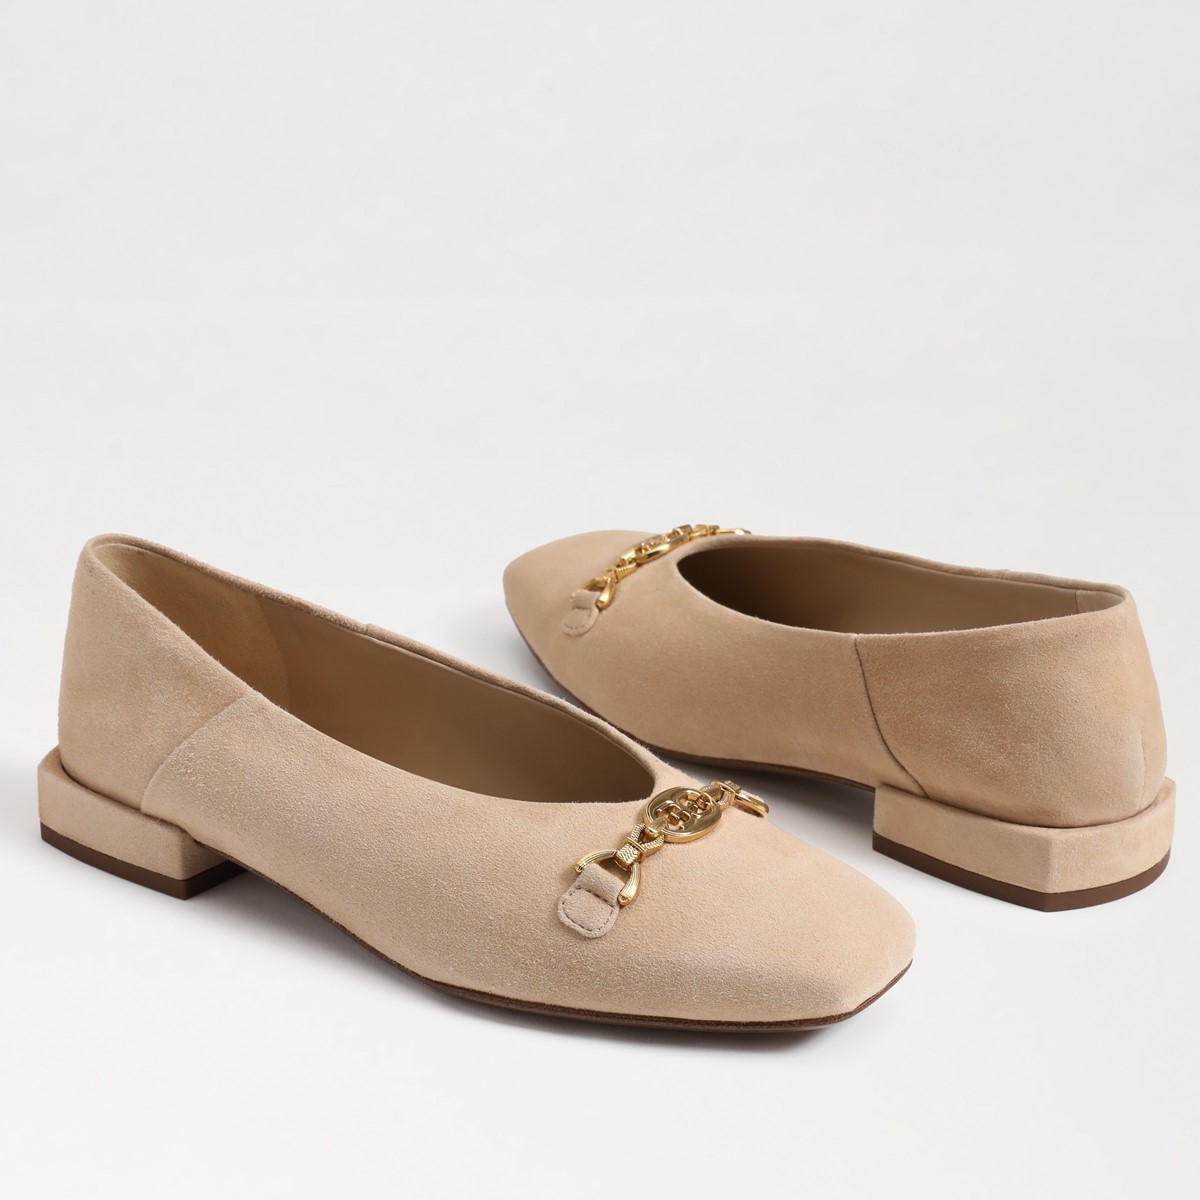 Sam Edelman Kimmi Square Toe Ballet Flat | Women's Flats and Loafers